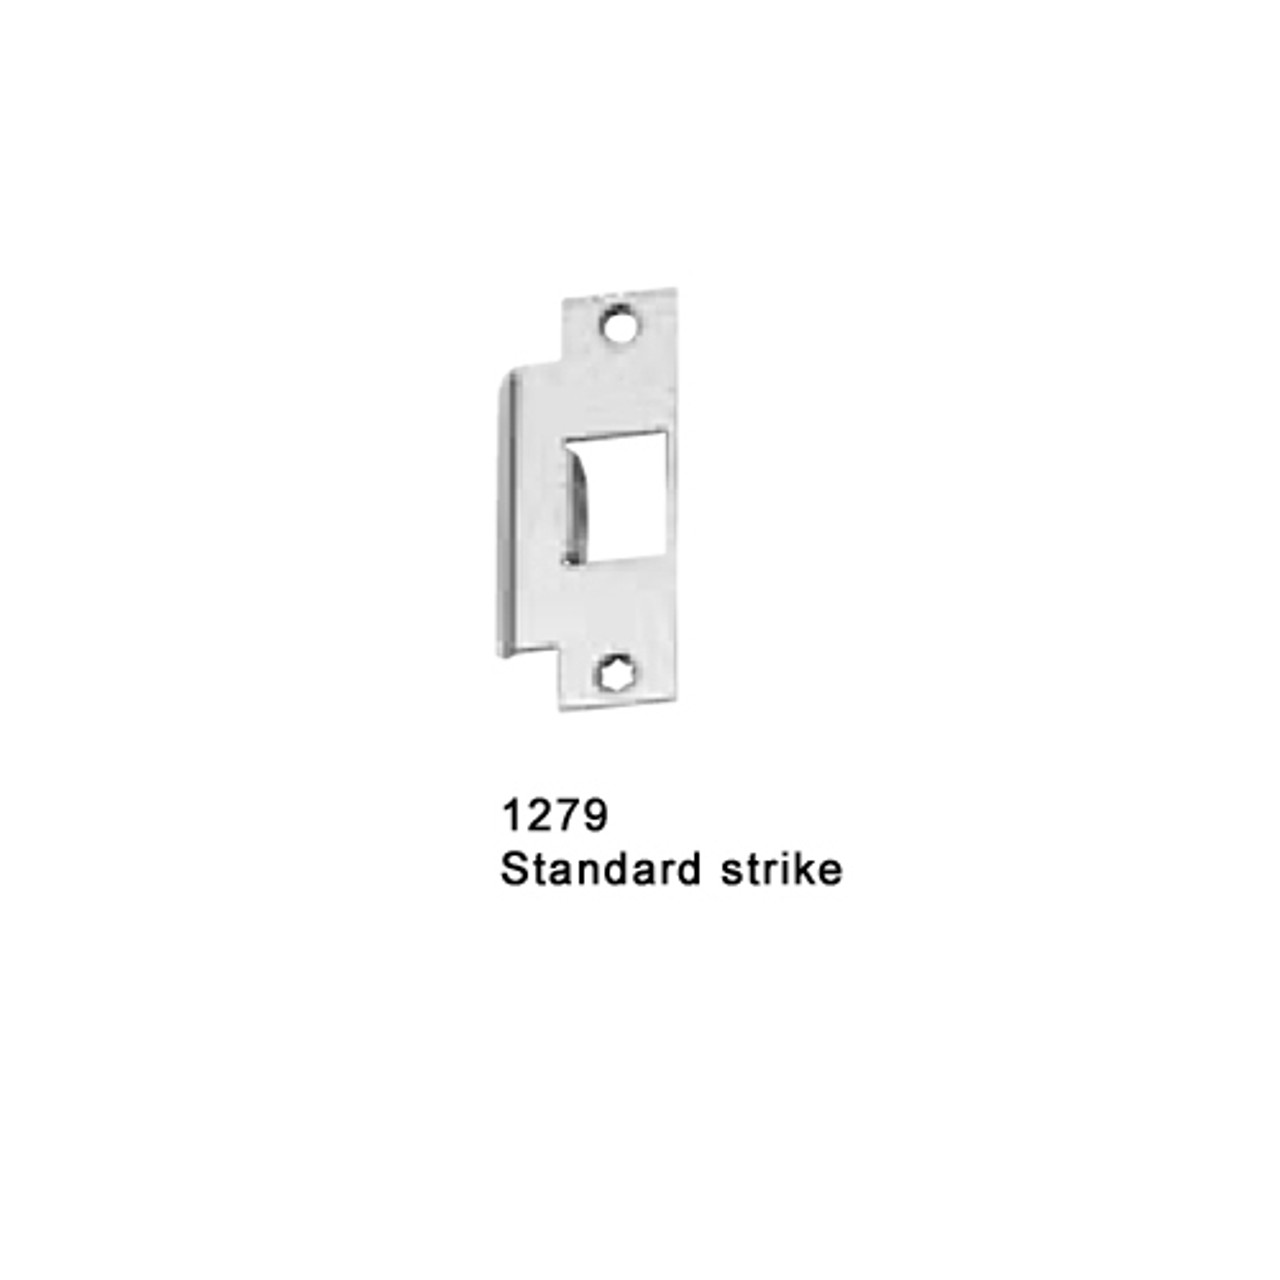 F-25-M-L-BE-Dane-US32D-3-LHR Falcon 25 Series Fire Rated Mortise Lock Devices 510L-BE Dane Lever Trim with Blank Escutcheon in Satin Stainless Steel